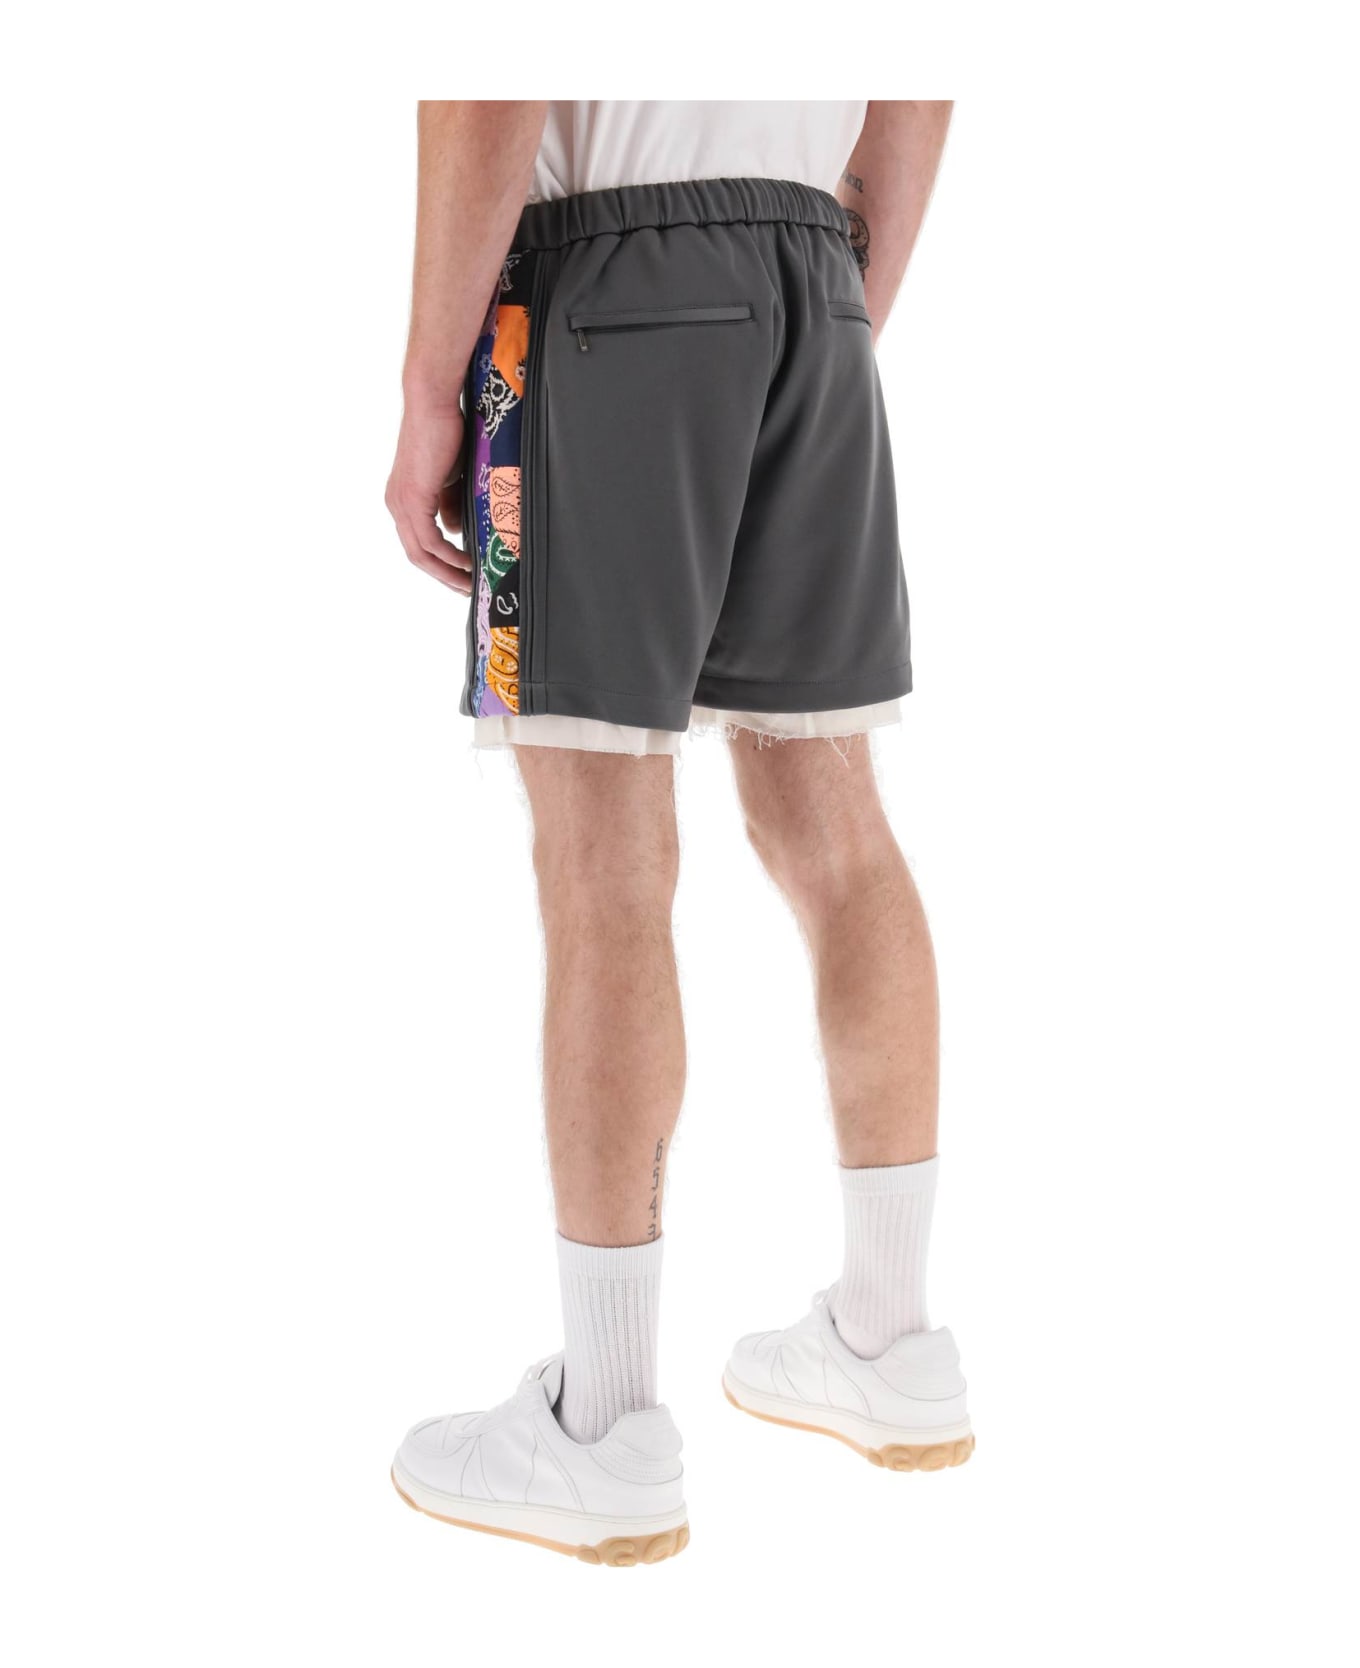 Children of the Discordance Jersey Shorts With Bandana Bands - GRAY (Grey)